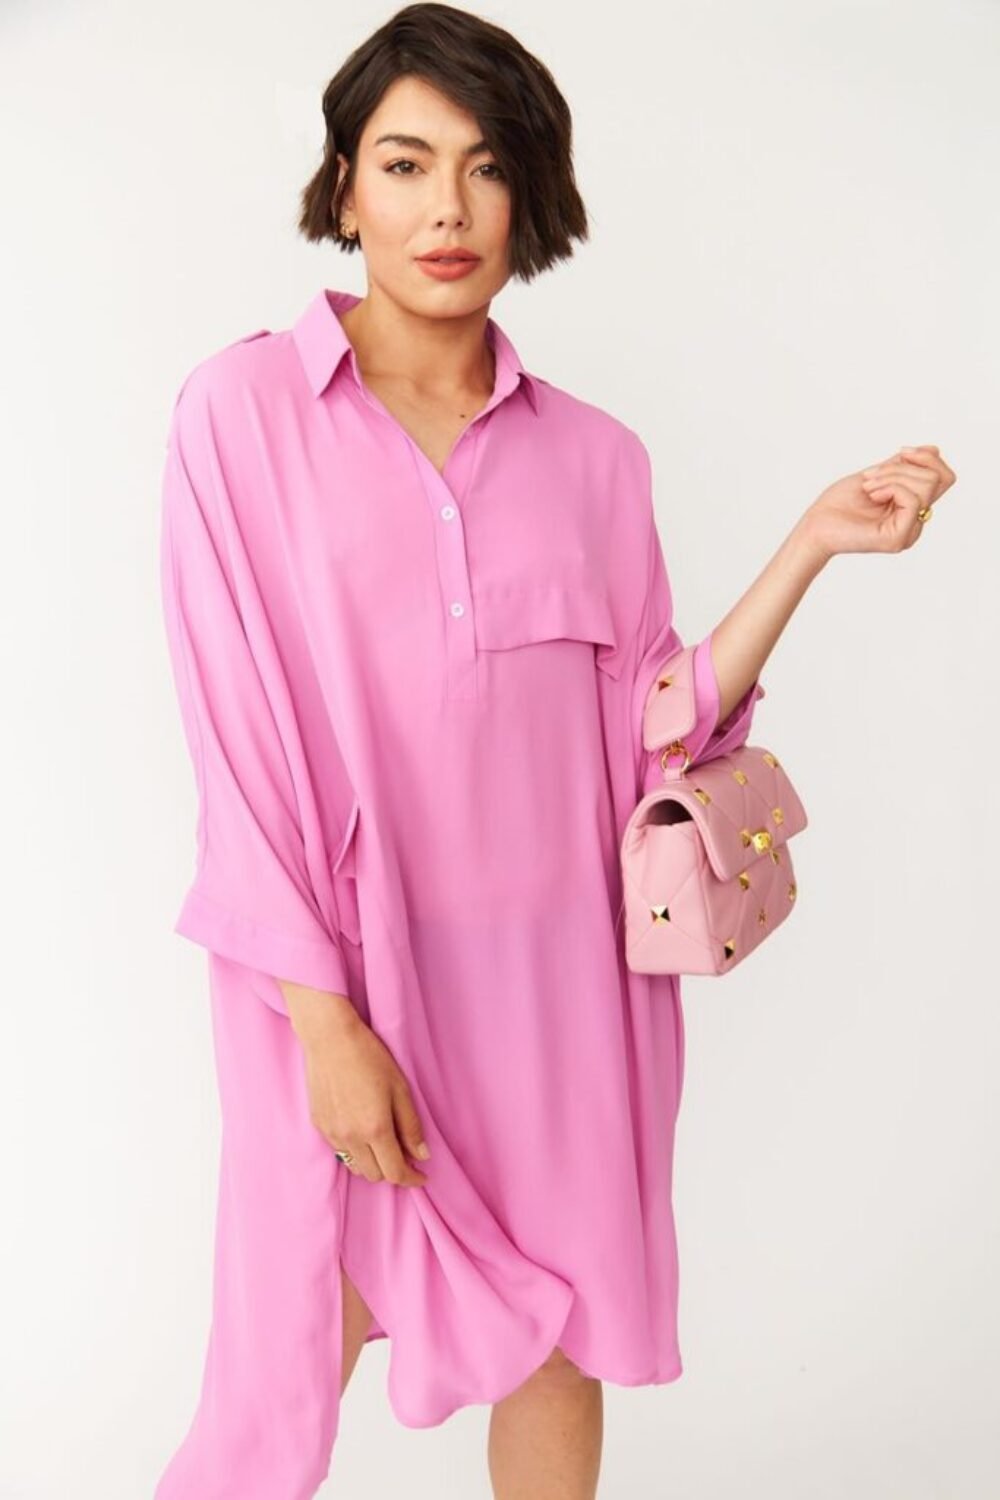 Shop Lux Oversized Pink Silk Blend Shirt Dress and women's luxury and designer clothes at www.lux-apparel.co.uk